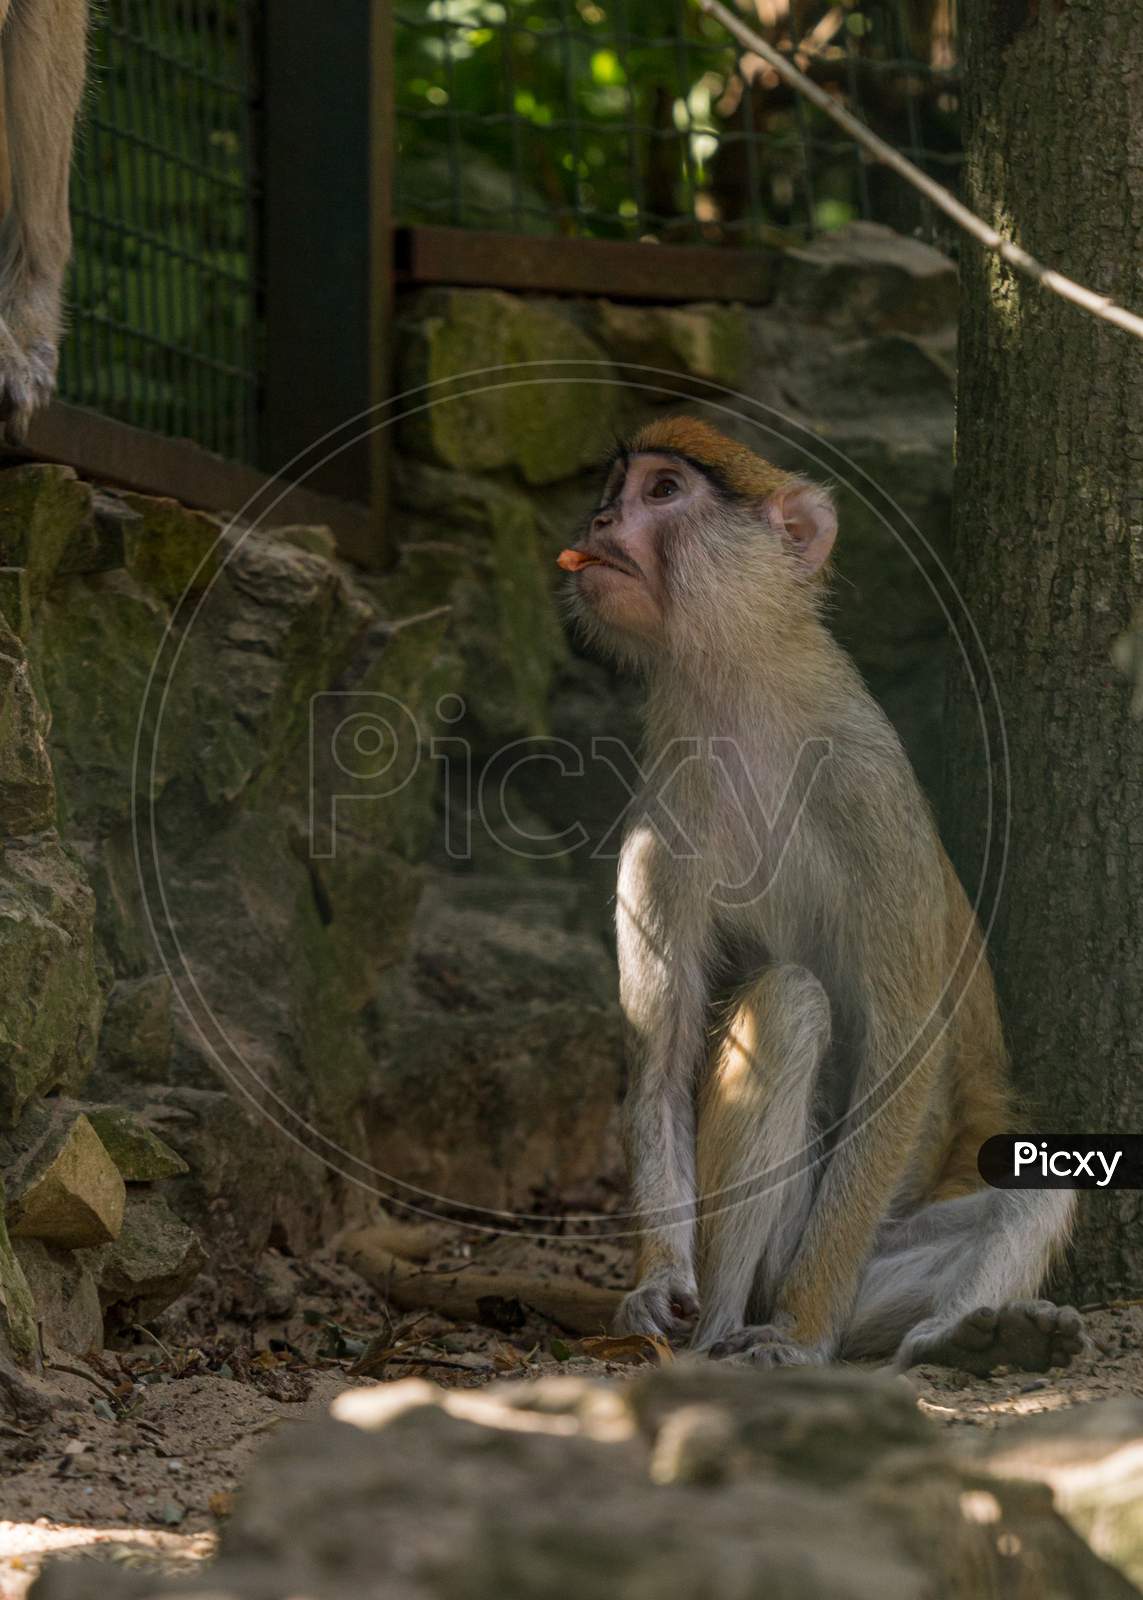 Brown Monkey Primate Sitting In Cage And Eating